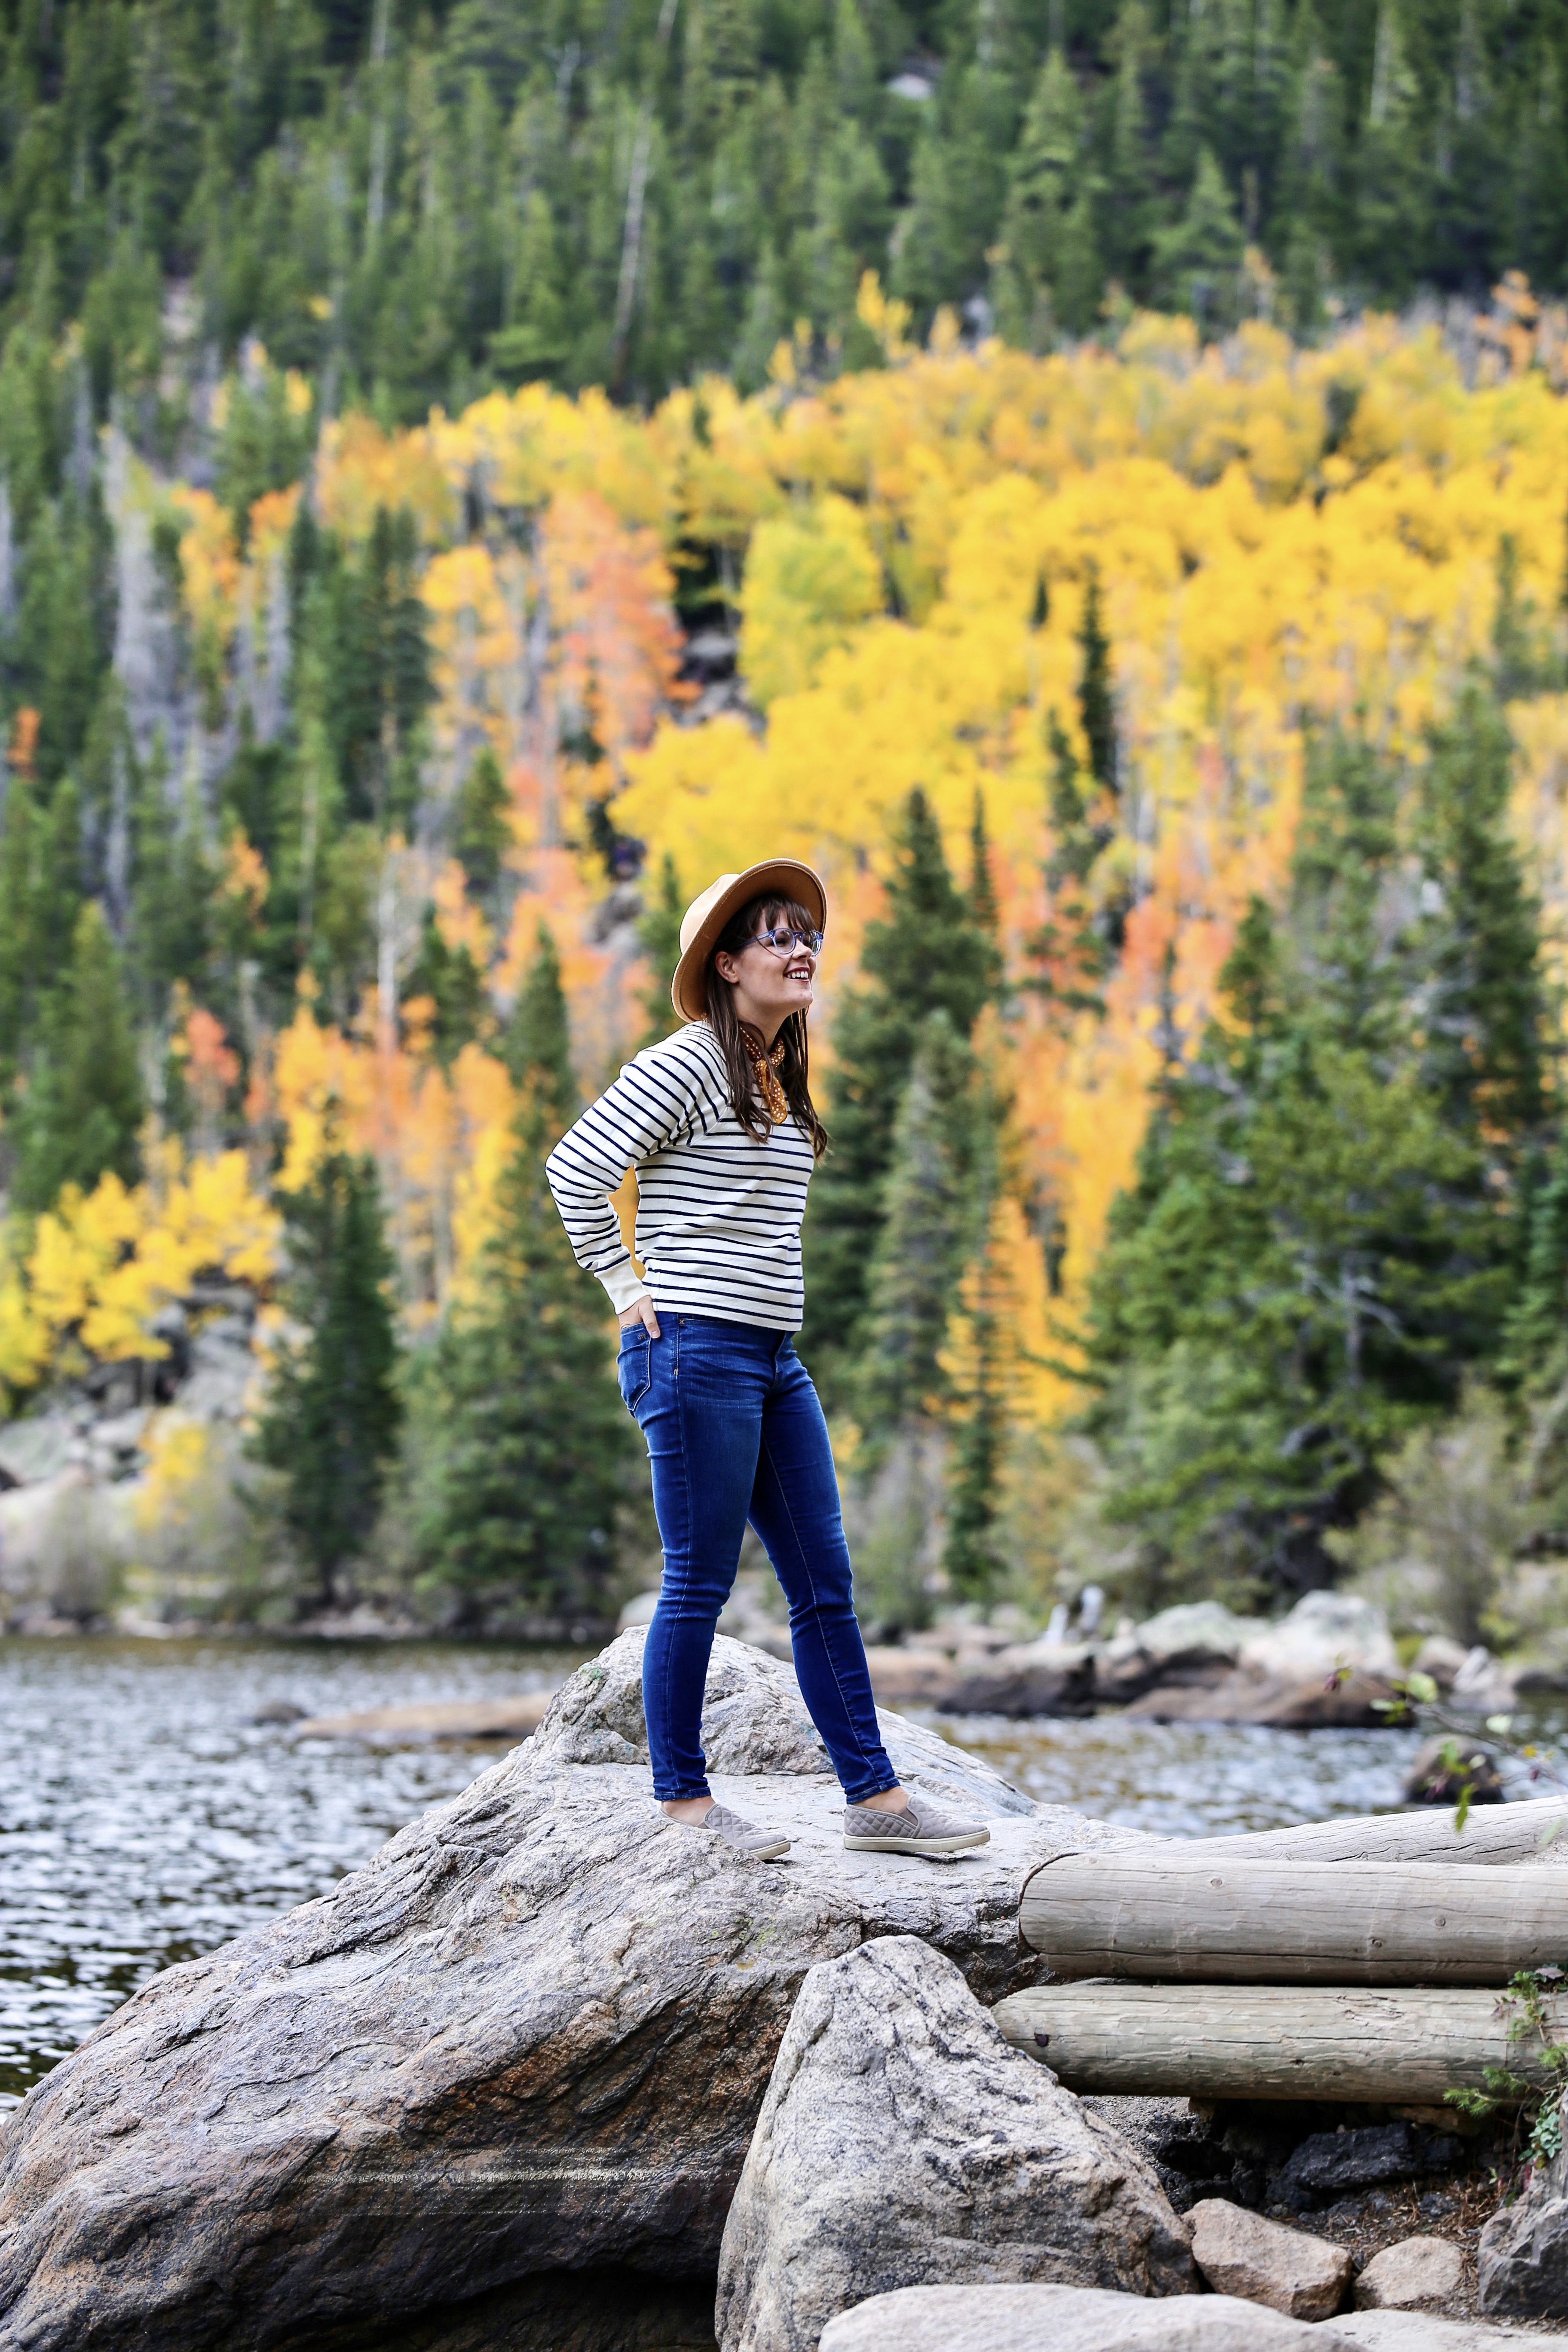 5 Photos to Inspire You to Visit Colorado in the Fall